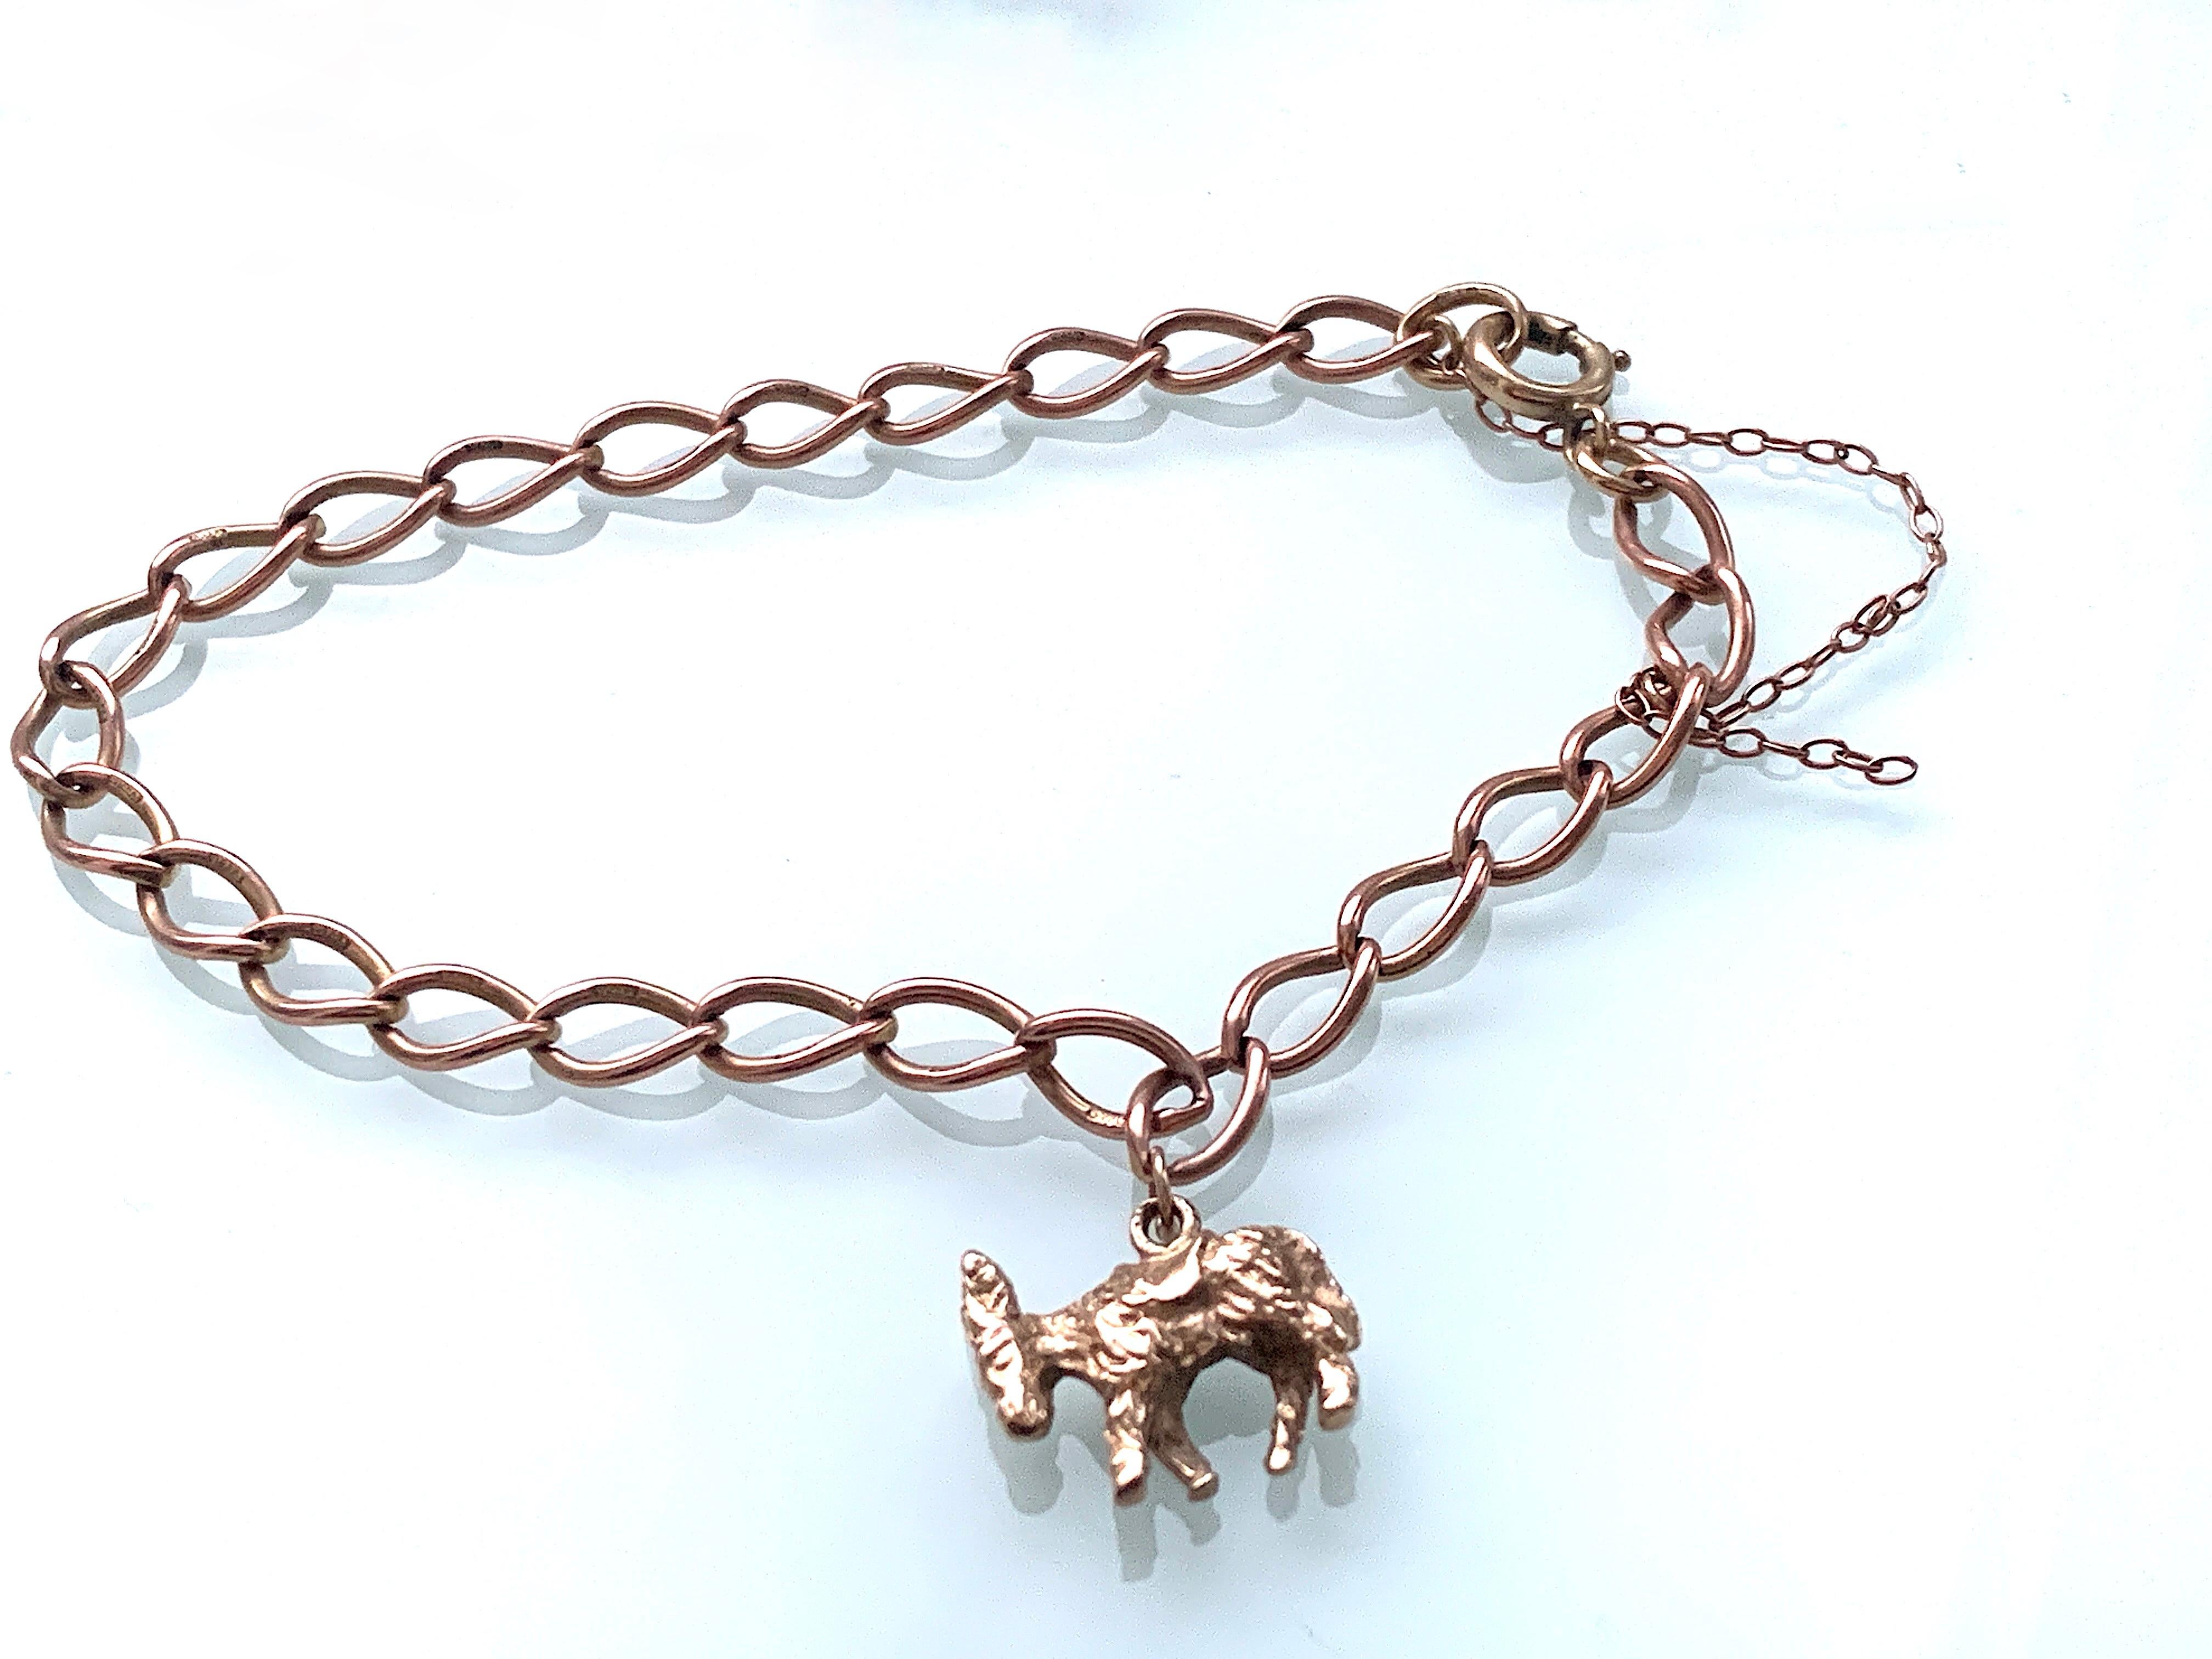 Vintage Rose Gold Bracelet
- each link is stamped 9 375-
with end link stamped W J S - dated 1963 
The bracelet weighs 7.14 grammes
Length 7.87 Inches

The Charm, the end clasp and the end jump ring all yellow gold.
all are soldered soldered to the